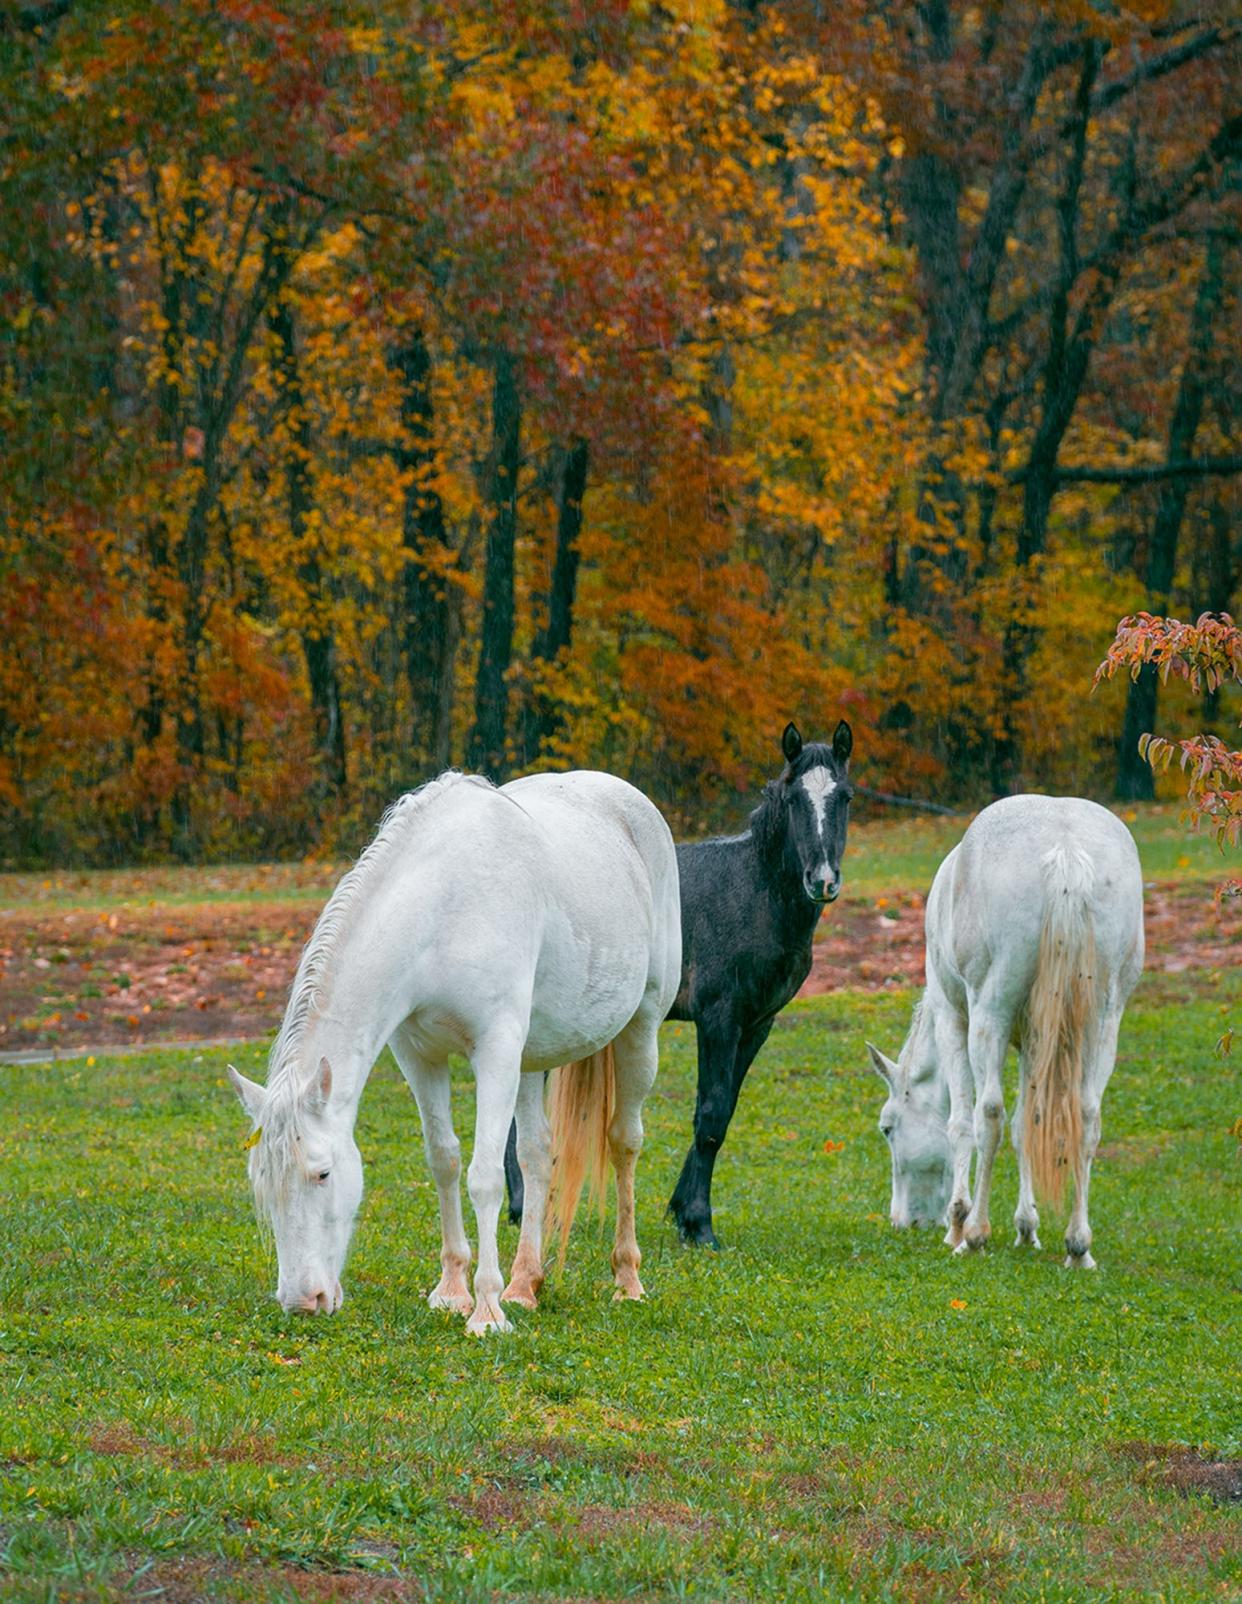 Wild horses have roamed Shannon County, Missouri, for decades and occasionally put in an appearance at Echo Bluff State Park. Spotting one becomes an instant trip highlight.